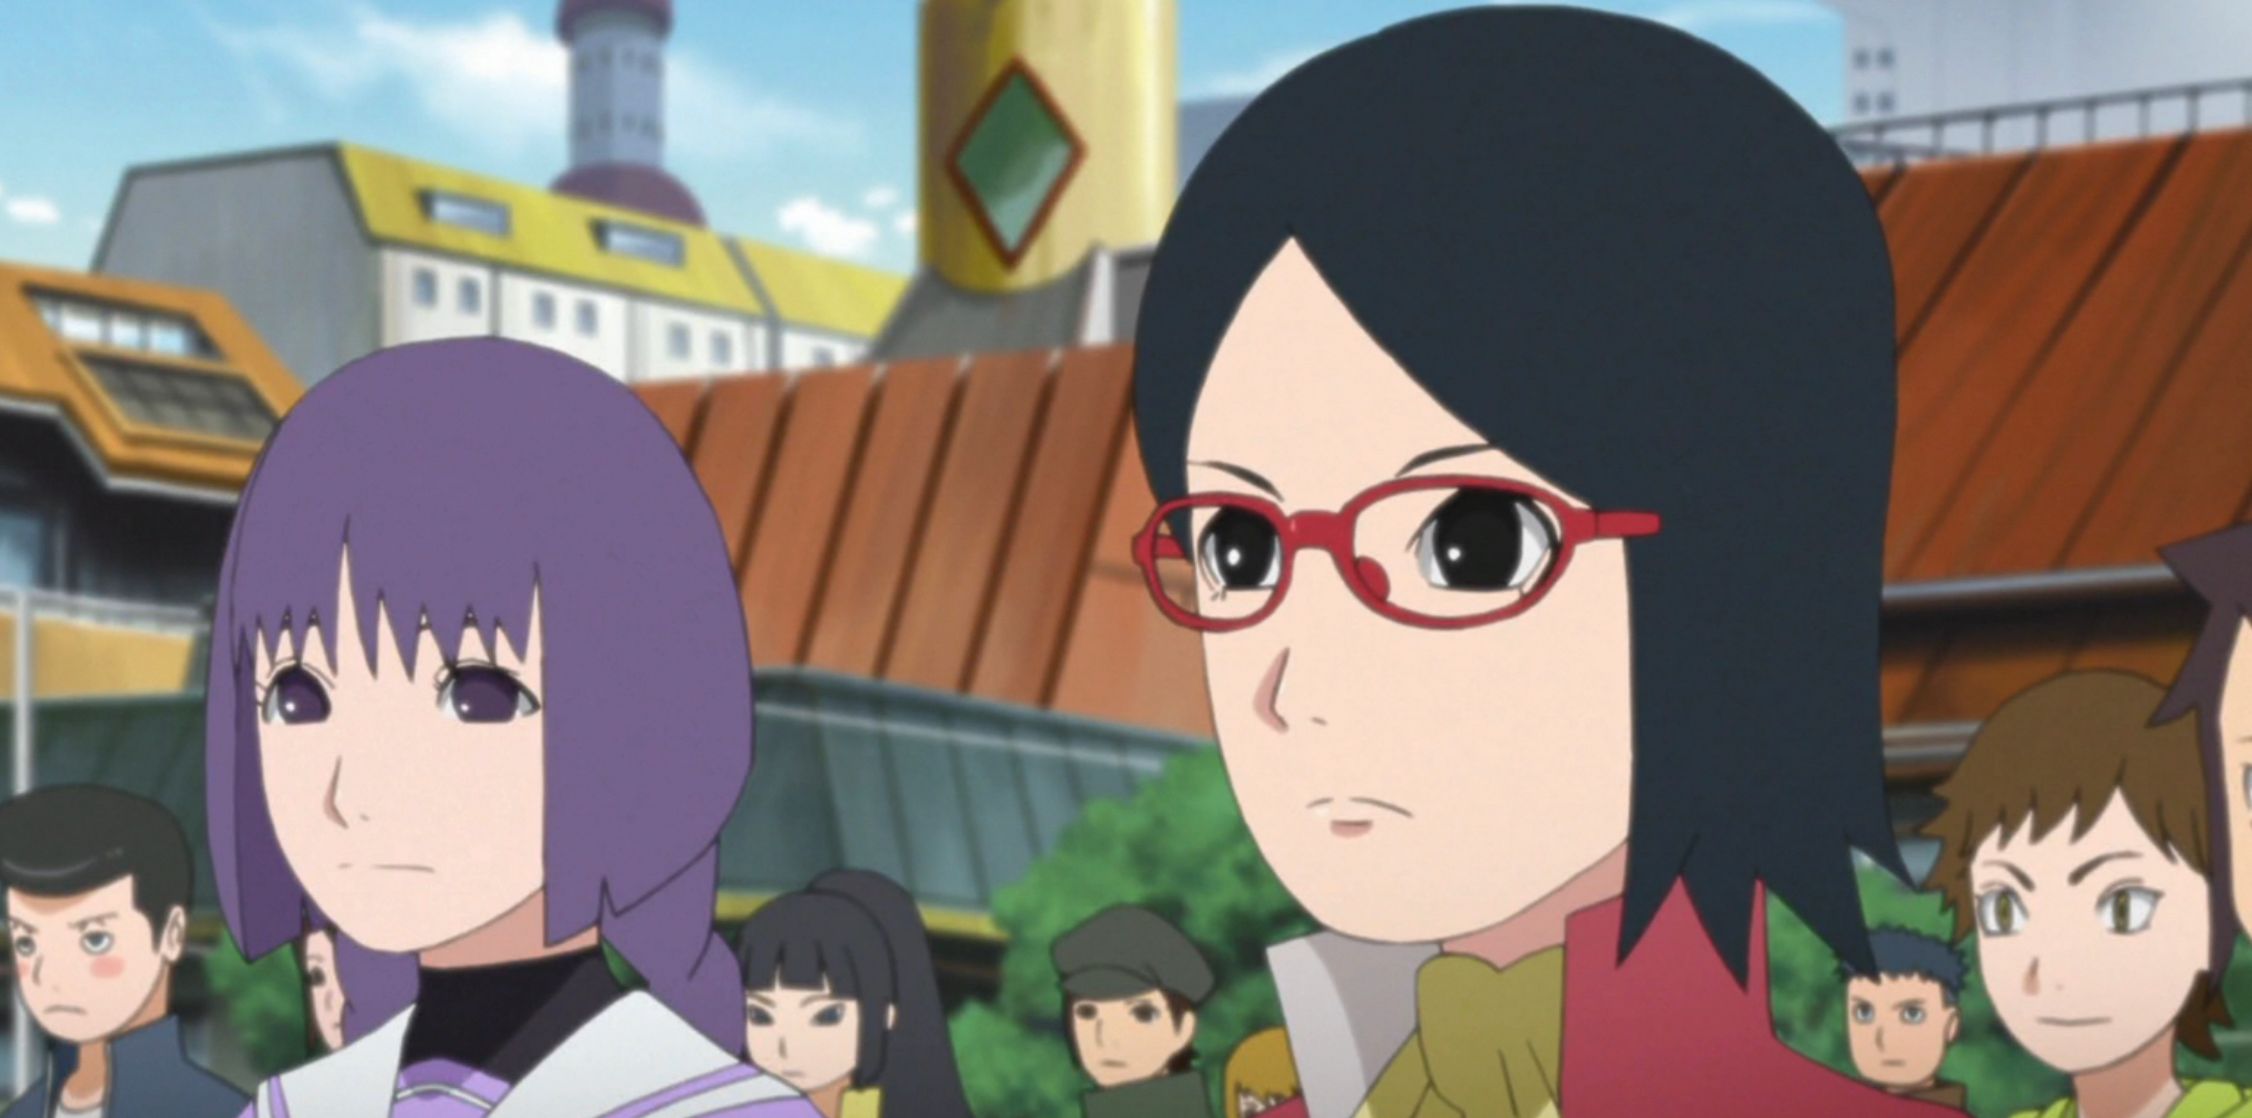 Sumire and Sarada stand in front of their classmates in Boruto